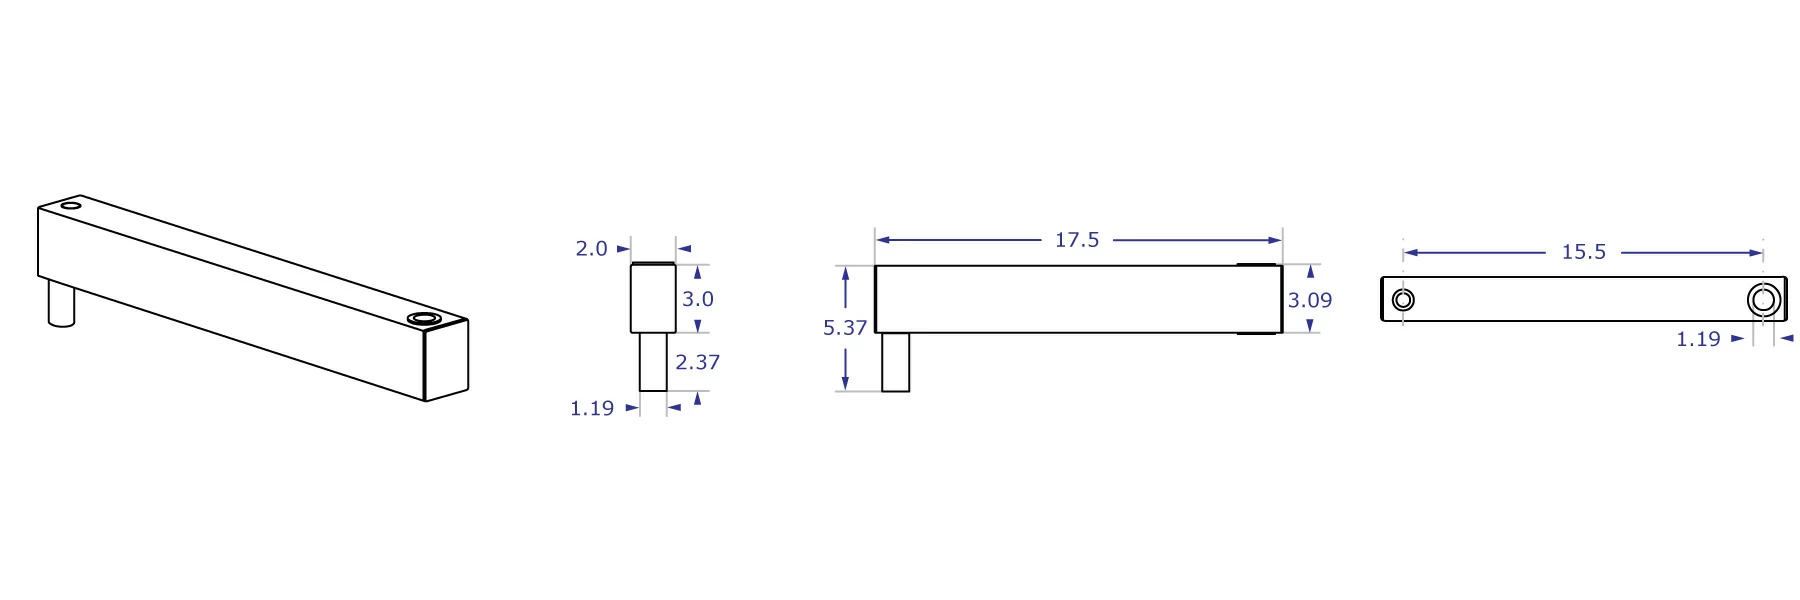 HDEXT 15.5 inch single pin heavy-duty extension specification drawings showing measurements for front, side and top views